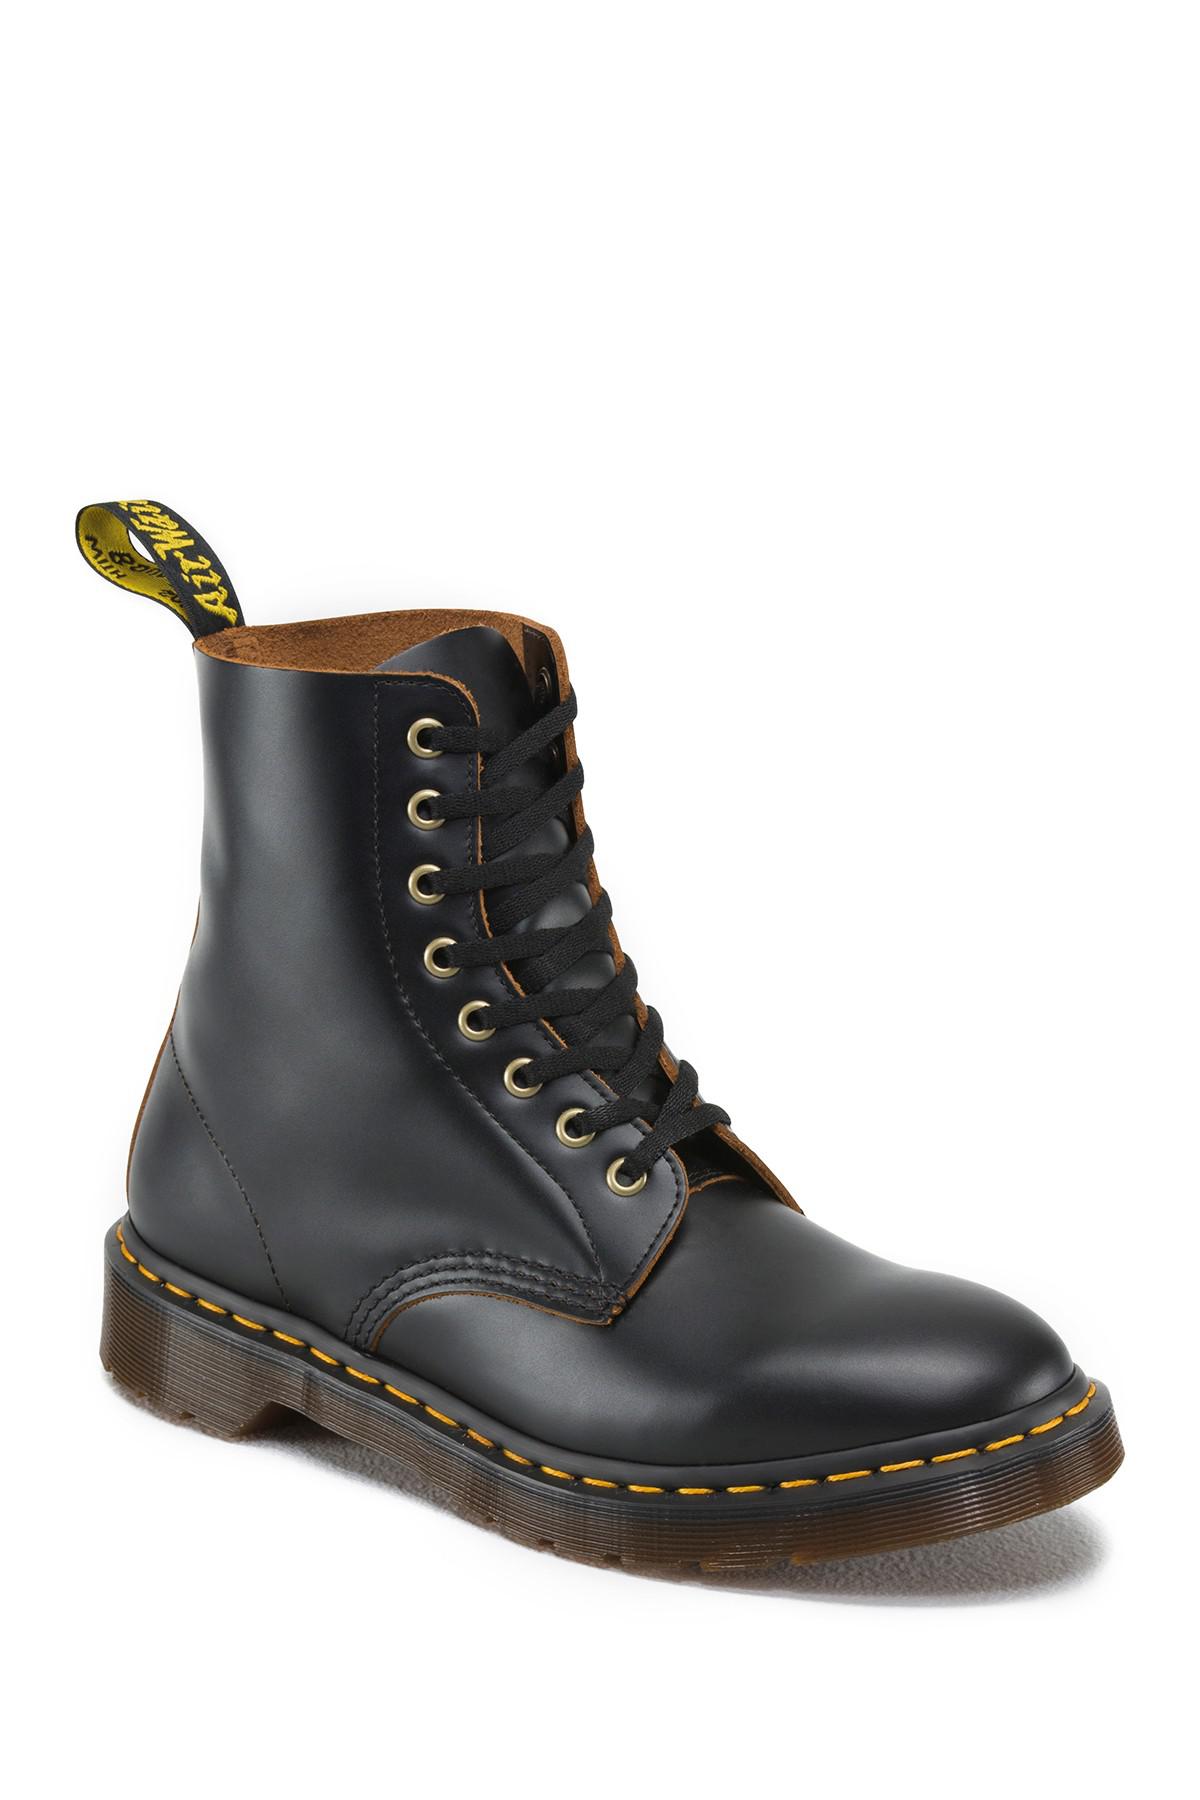 Dr. Martens Pascal Vintage Smooth Leather Boot in Black for Men - Lyst